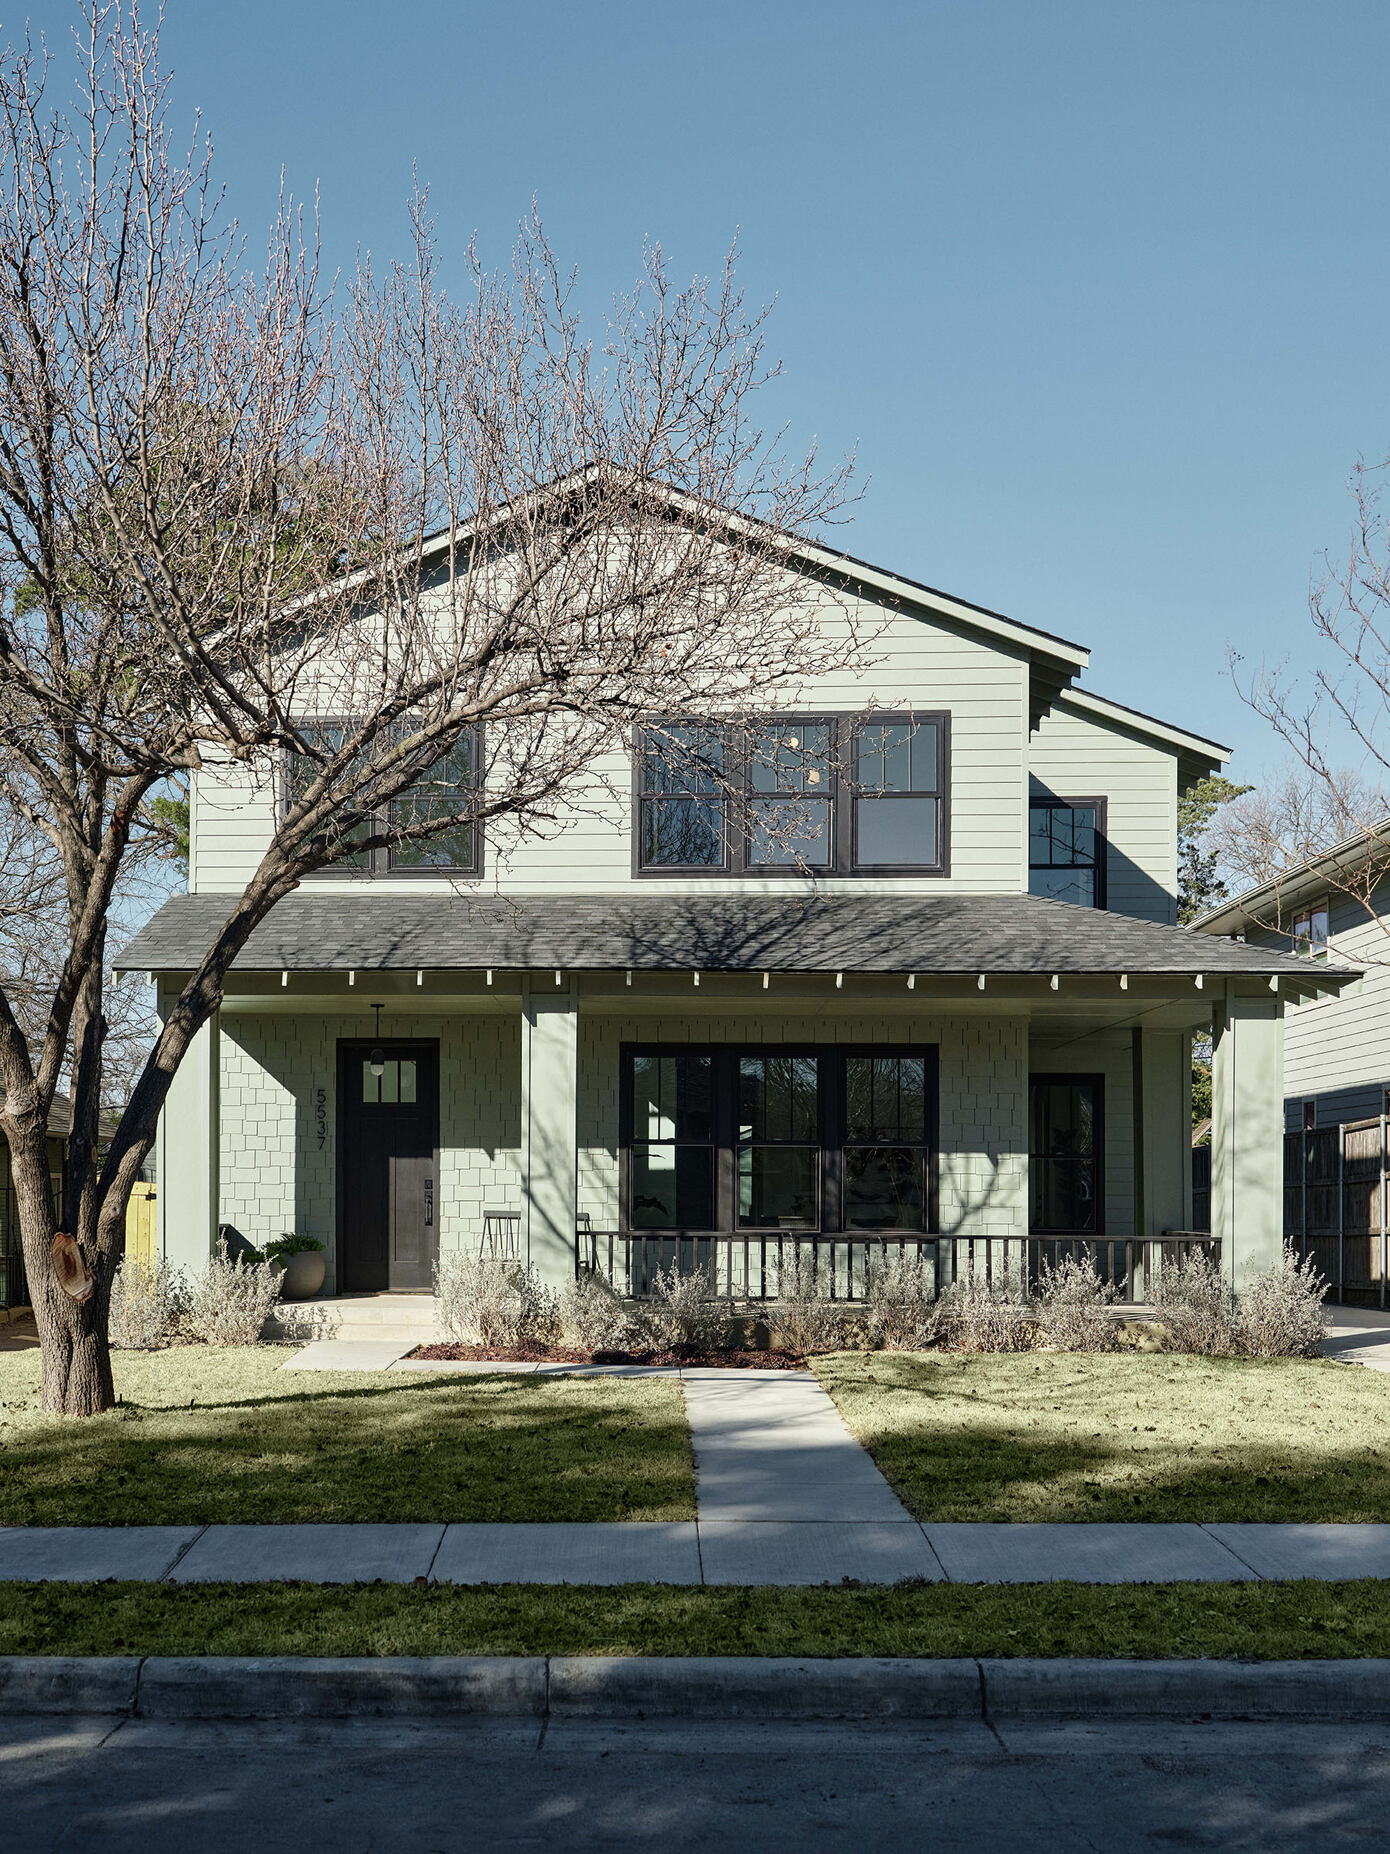 Richard House: Object & Architecture’s Modern Take on Traditional Craftsman Homes